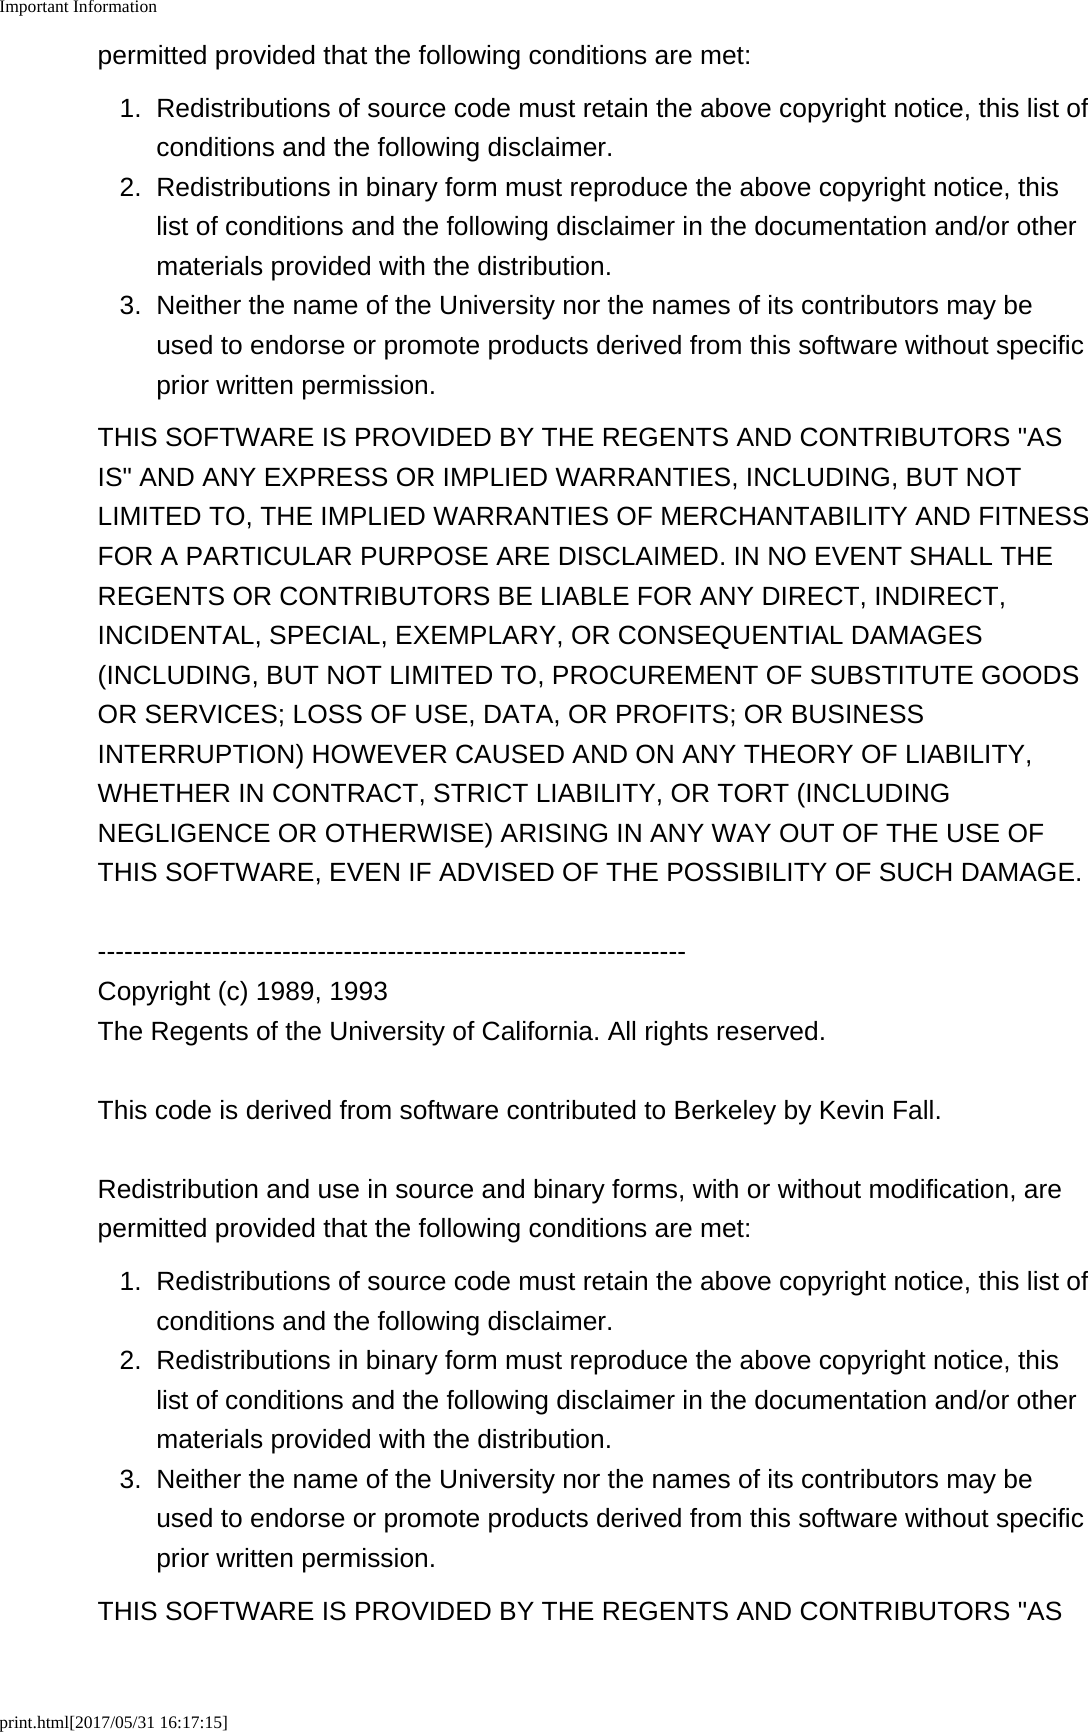 Important Informationprint.html[2017/05/31 16:17:15]permitted provided that the following conditions are met:1. Redistributions of source code must retain the above copyright notice, this list ofconditions and the following disclaimer.2. Redistributions in binary form must reproduce the above copyright notice, thislist of conditions and the following disclaimer in the documentation and/or othermaterials provided with the distribution.3.Neither the name of the University nor the names of its contributors may beused to endorse or promote products derived from this software without specificprior written permission.THIS SOFTWARE IS PROVIDED BY THE REGENTS AND CONTRIBUTORS &quot;ASIS&quot; AND ANY EXPRESS OR IMPLIED WARRANTIES, INCLUDING, BUT NOTLIMITED TO, THE IMPLIED WARRANTIES OF MERCHANTABILITY AND FITNESSFOR A PARTICULAR PURPOSE ARE DISCLAIMED. IN NO EVENT SHALL THEREGENTS OR CONTRIBUTORS BE LIABLE FOR ANY DIRECT, INDIRECT,INCIDENTAL, SPECIAL, EXEMPLARY, OR CONSEQUENTIAL DAMAGES(INCLUDING, BUT NOT LIMITED TO, PROCUREMENT OF SUBSTITUTE GOODSOR SERVICES; LOSS OF USE, DATA, OR PROFITS; OR BUSINESSINTERRUPTION) HOWEVER CAUSED AND ON ANY THEORY OF LIABILITY,WHETHER IN CONTRACT, STRICT LIABILITY, OR TORT (INCLUDINGNEGLIGENCE OR OTHERWISE) ARISING IN ANY WAY OUT OF THE USE OFTHIS SOFTWARE, EVEN IF ADVISED OF THE POSSIBILITY OF SUCH DAMAGE.-------------------------------------------------------------------Copyright (c) 1989, 1993The Regents of the University of California. All rights reserved.This code is derived from software contributed to Berkeley by Kevin Fall.Redistribution and use in source and binary forms, with or without modification, arepermitted provided that the following conditions are met:1. Redistributions of source code must retain the above copyright notice, this list ofconditions and the following disclaimer.2.Redistributions in binary form must reproduce the above copyright notice, thislist of conditions and the following disclaimer in the documentation and/or othermaterials provided with the distribution.3. Neither the name of the University nor the names of its contributors may beused to endorse or promote products derived from this software without specificprior written permission.THIS SOFTWARE IS PROVIDED BY THE REGENTS AND CONTRIBUTORS &quot;AS